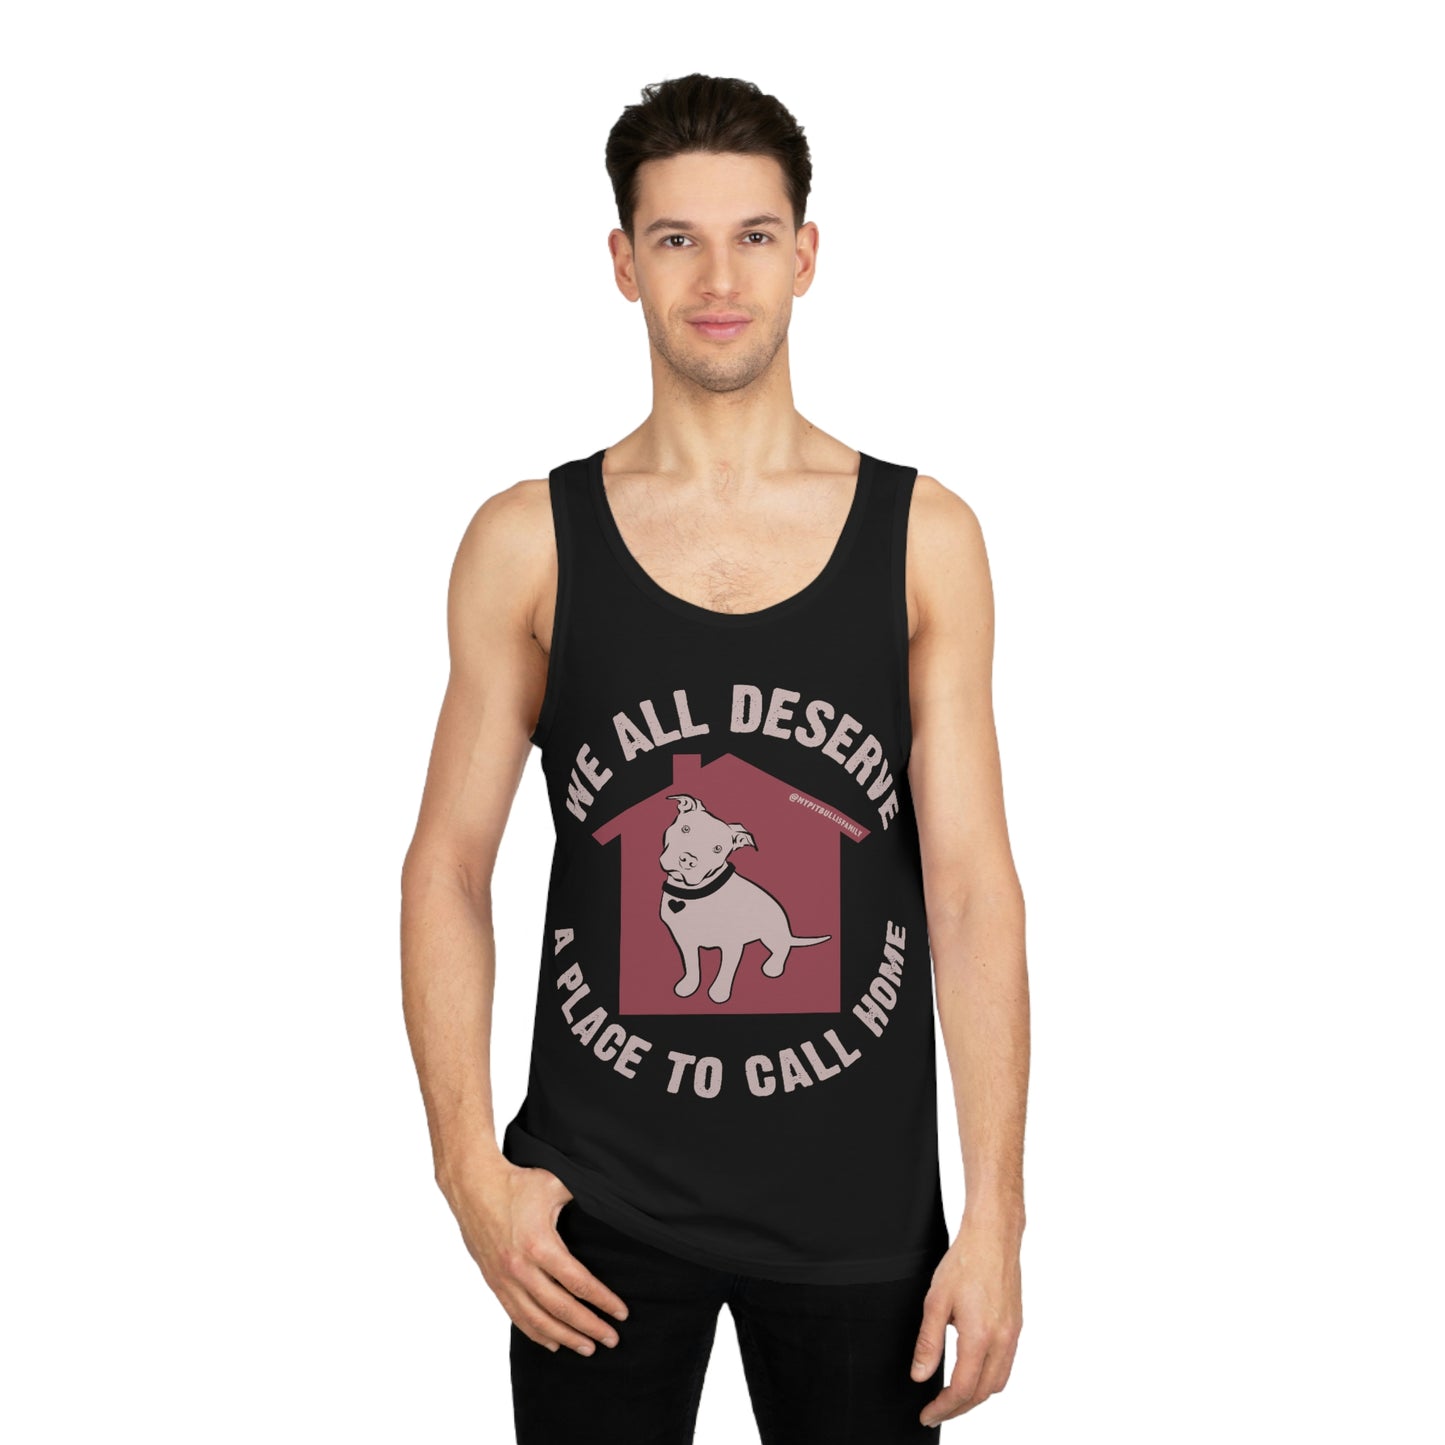 We All Deserve a Place to Call Home Unisex Softstyle™ Tank Top